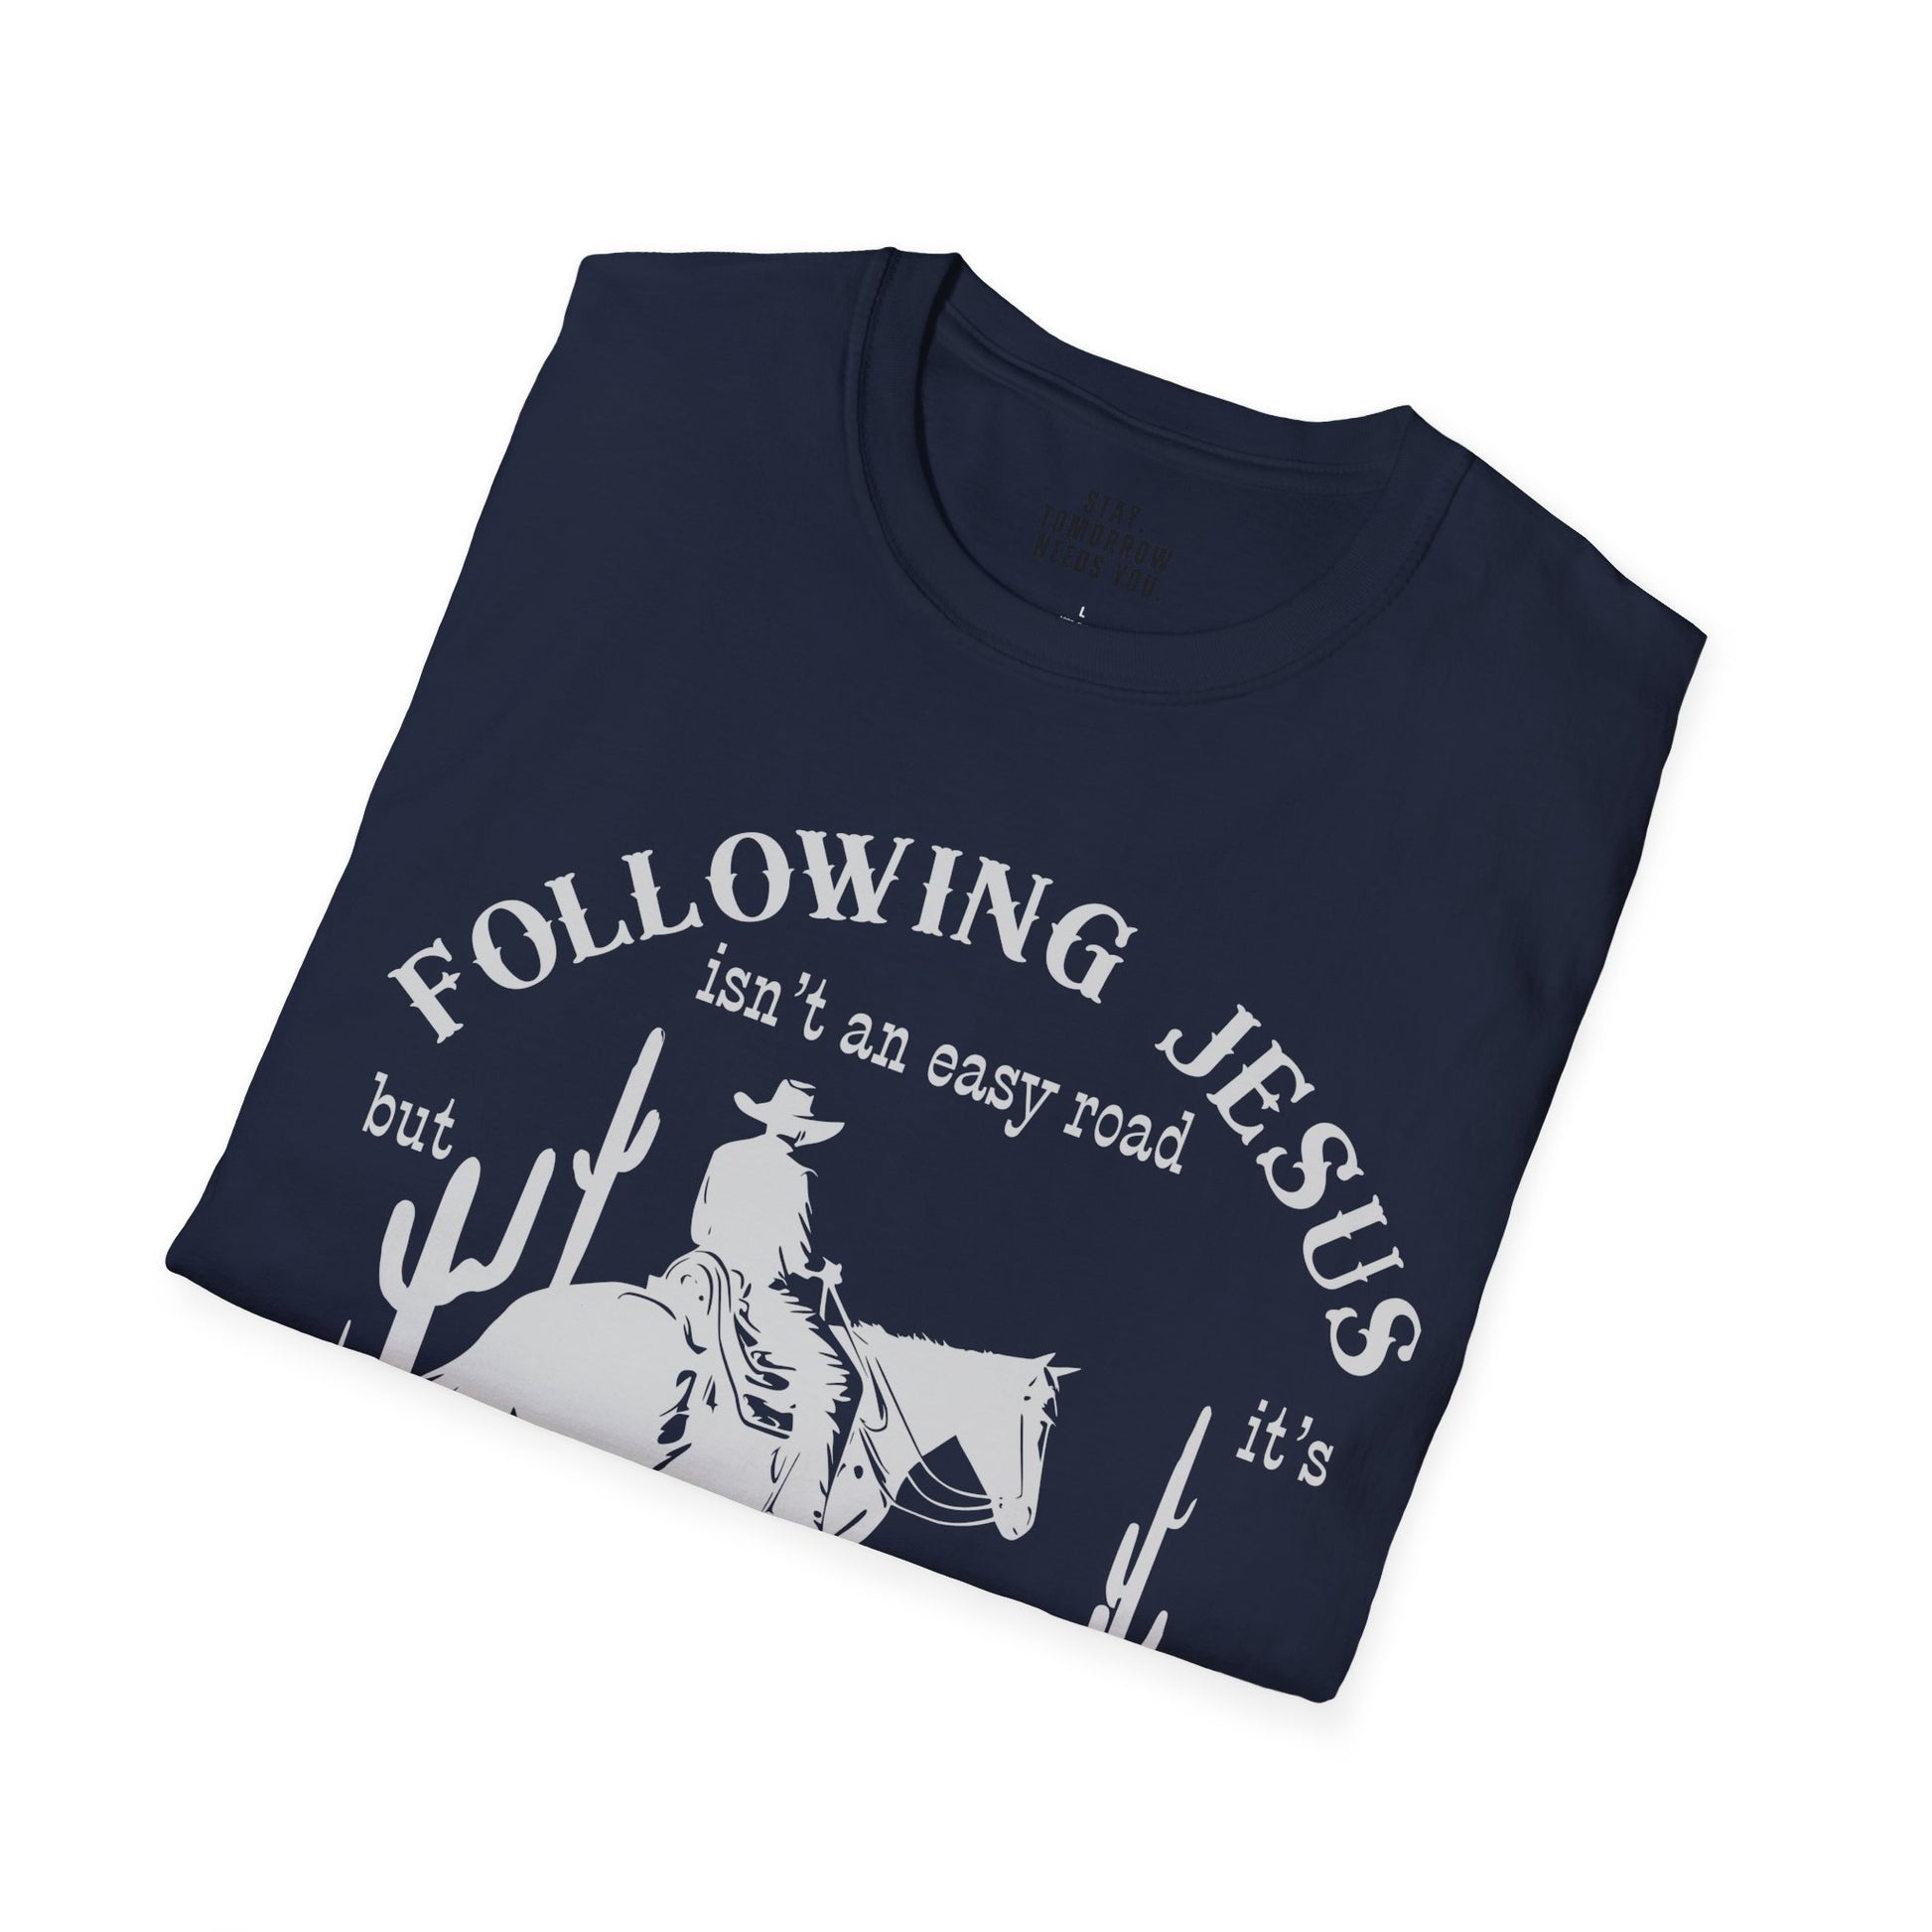 Following Jesus isn’t an Easy Road But it’s the Only Road Worth Following Sweatshirt Father’s Day gift Christian gift Jesus saves Jesus Christ Western Cowboy Faith God - Stay Tomorrow Needs You Following Jesus isn’t an Easy Road But it’s the Only Road Worth Following Sweatshirt Father’s Day gift Christian gift Jesus saves Jesus Christ Western Cowboy Faith God